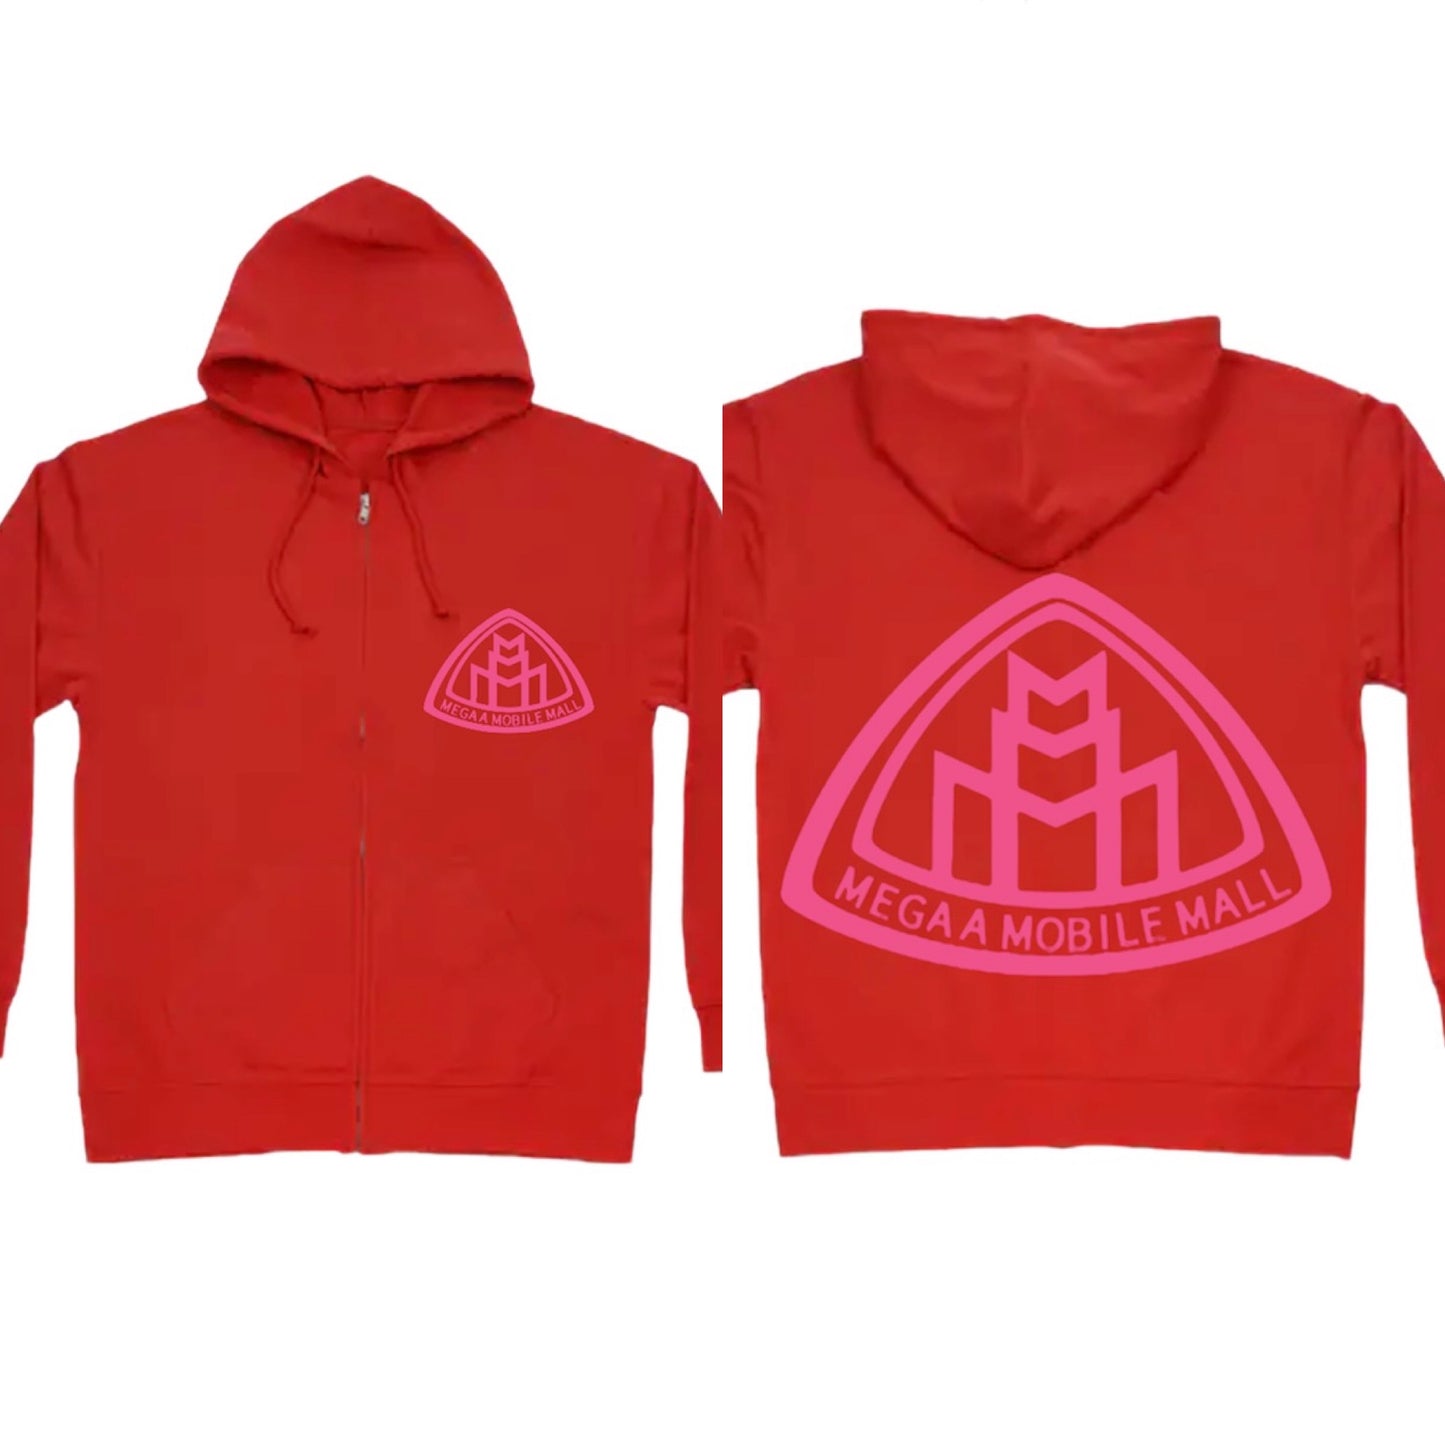 megaamobilemall red zip up hoodie with pink logo